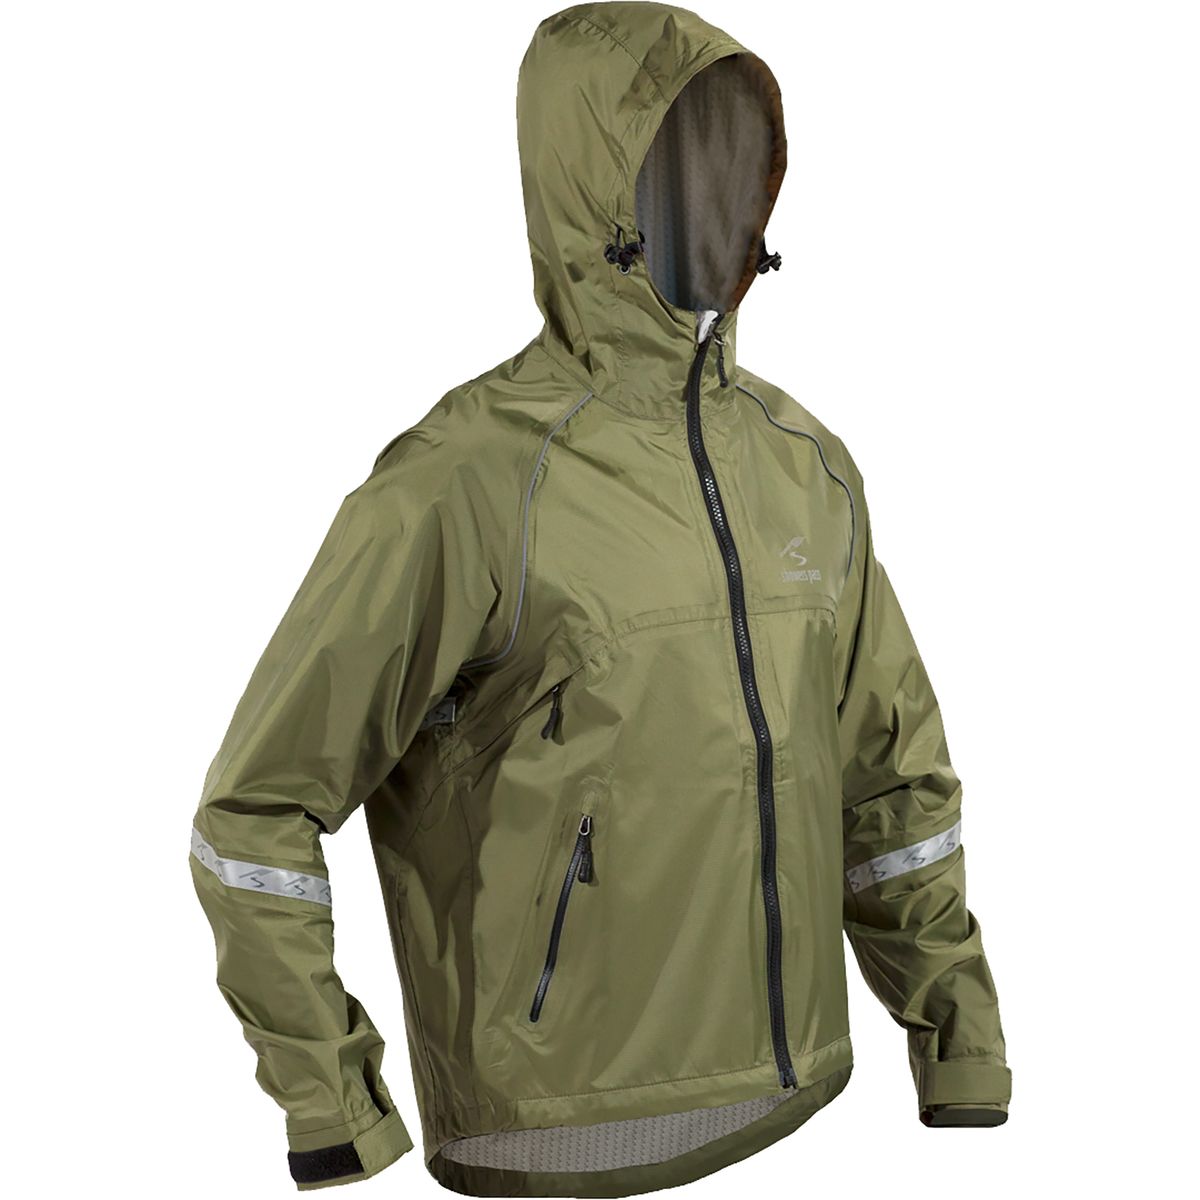 Showers Pass Crossover Jacket Men's